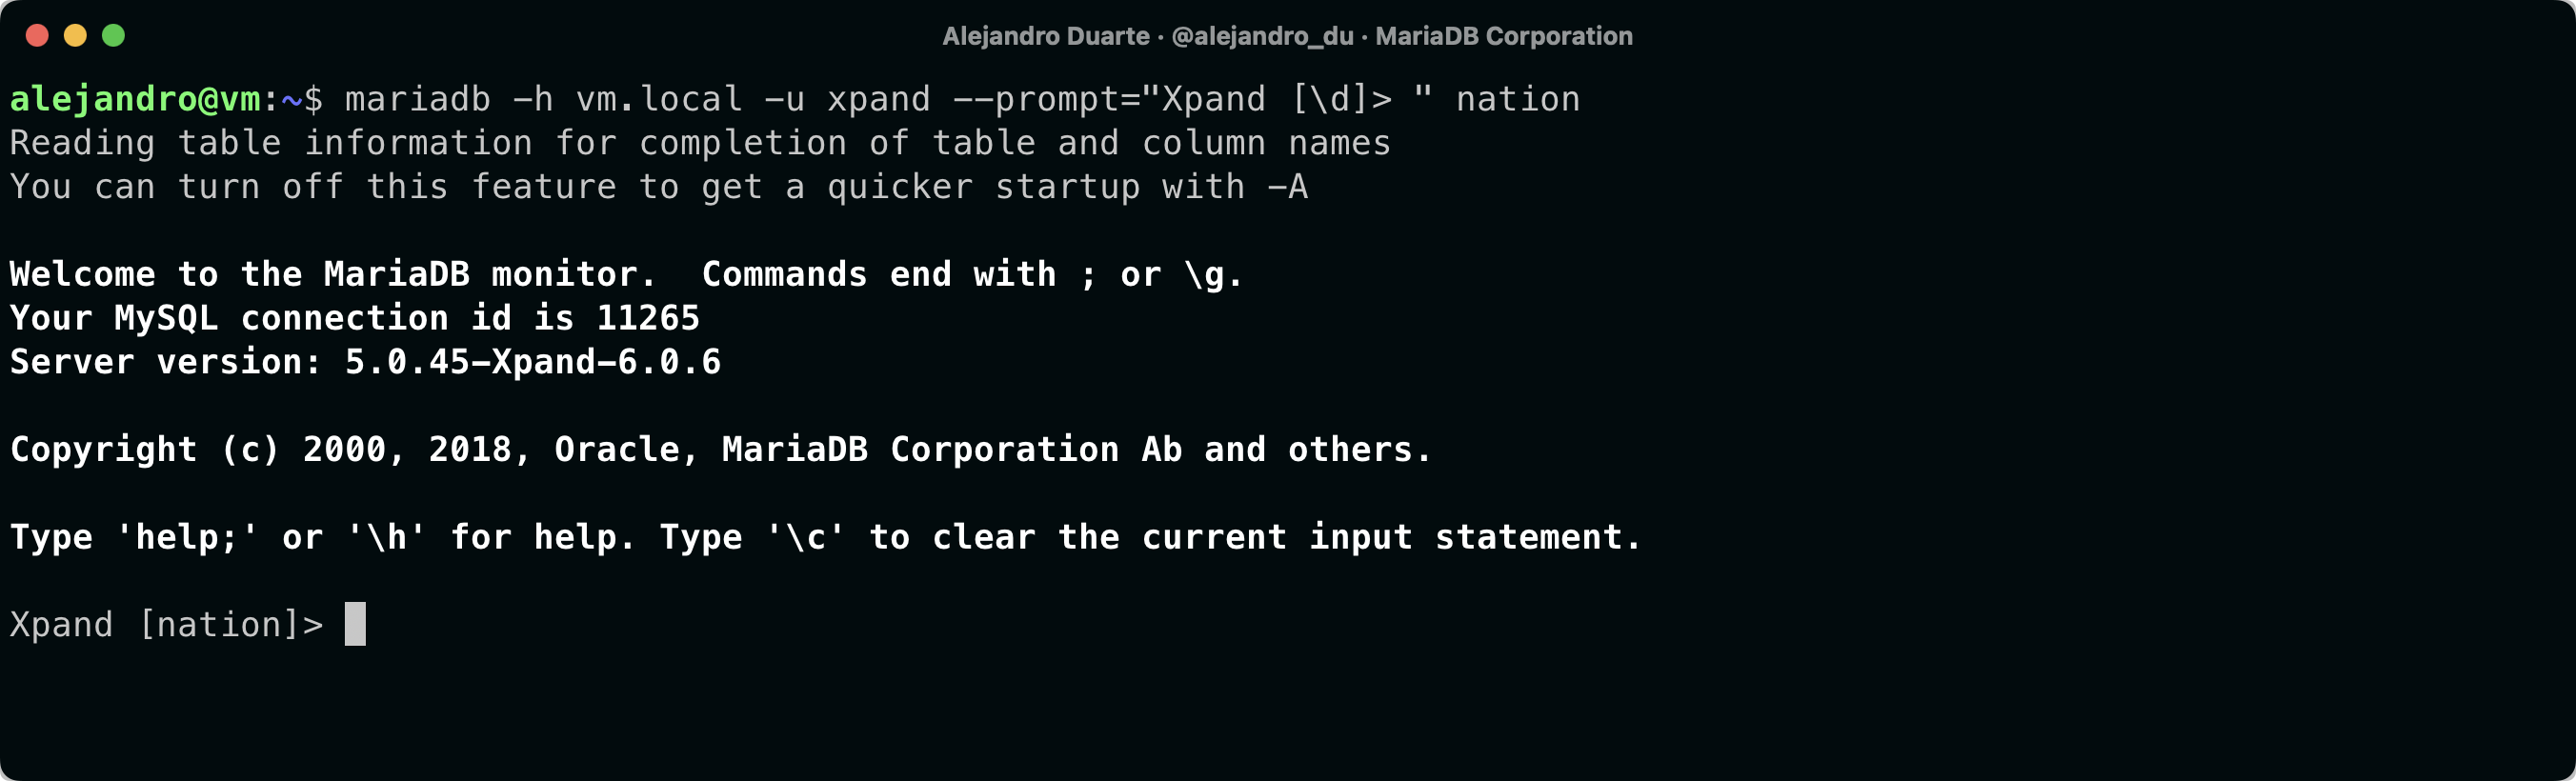 Connecting to MariaDB Xpand using a custom prompt